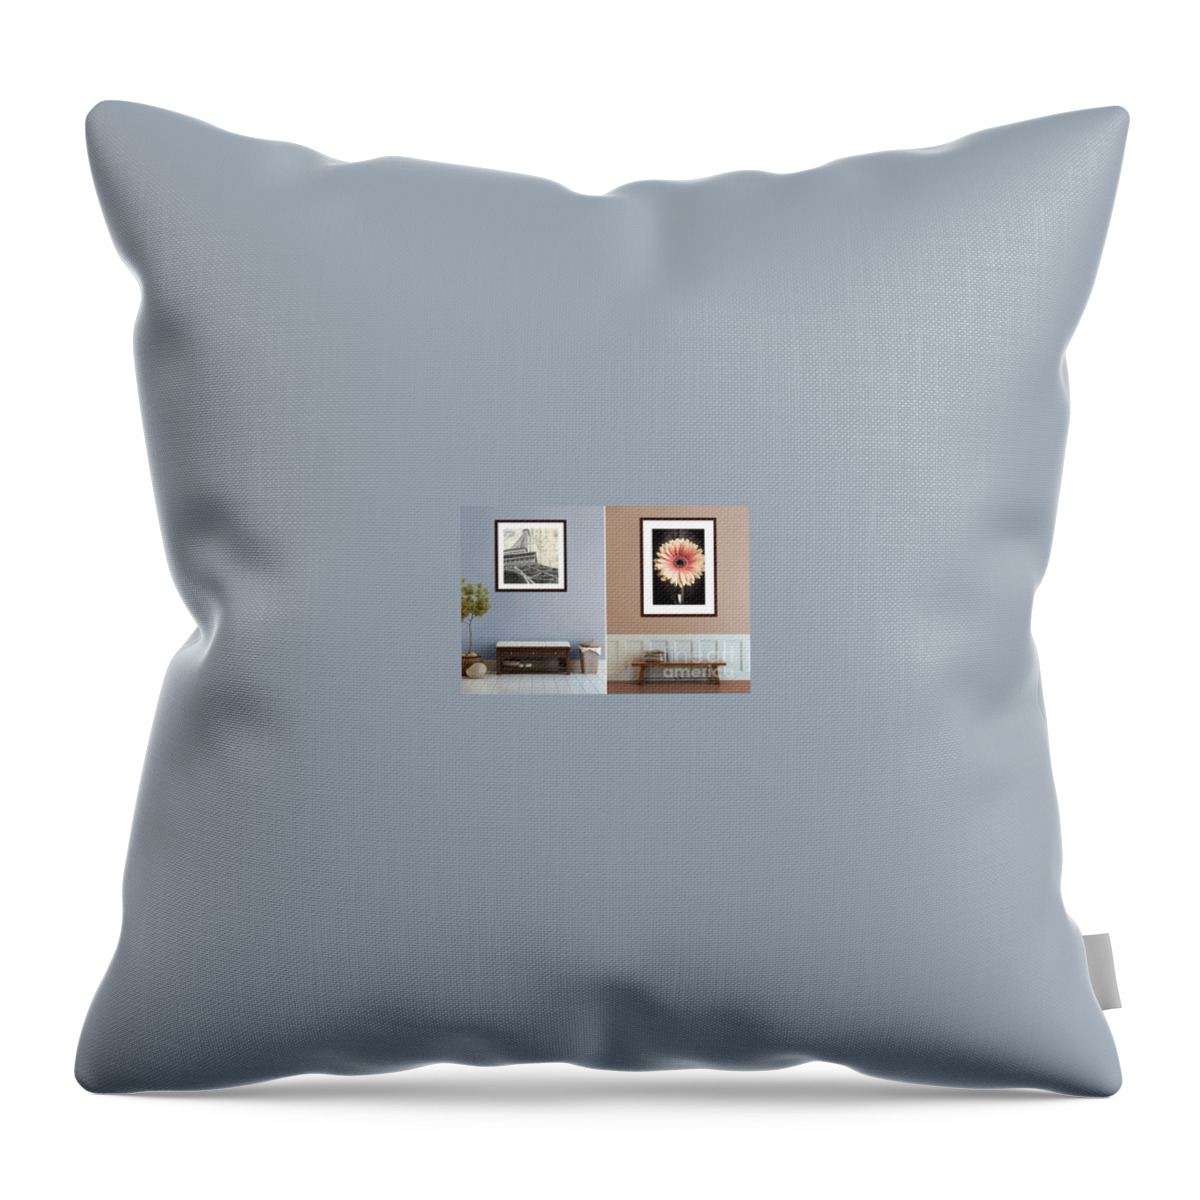 Art Throw Pillow featuring the photograph Fine art photography in the home by Edward Fielding